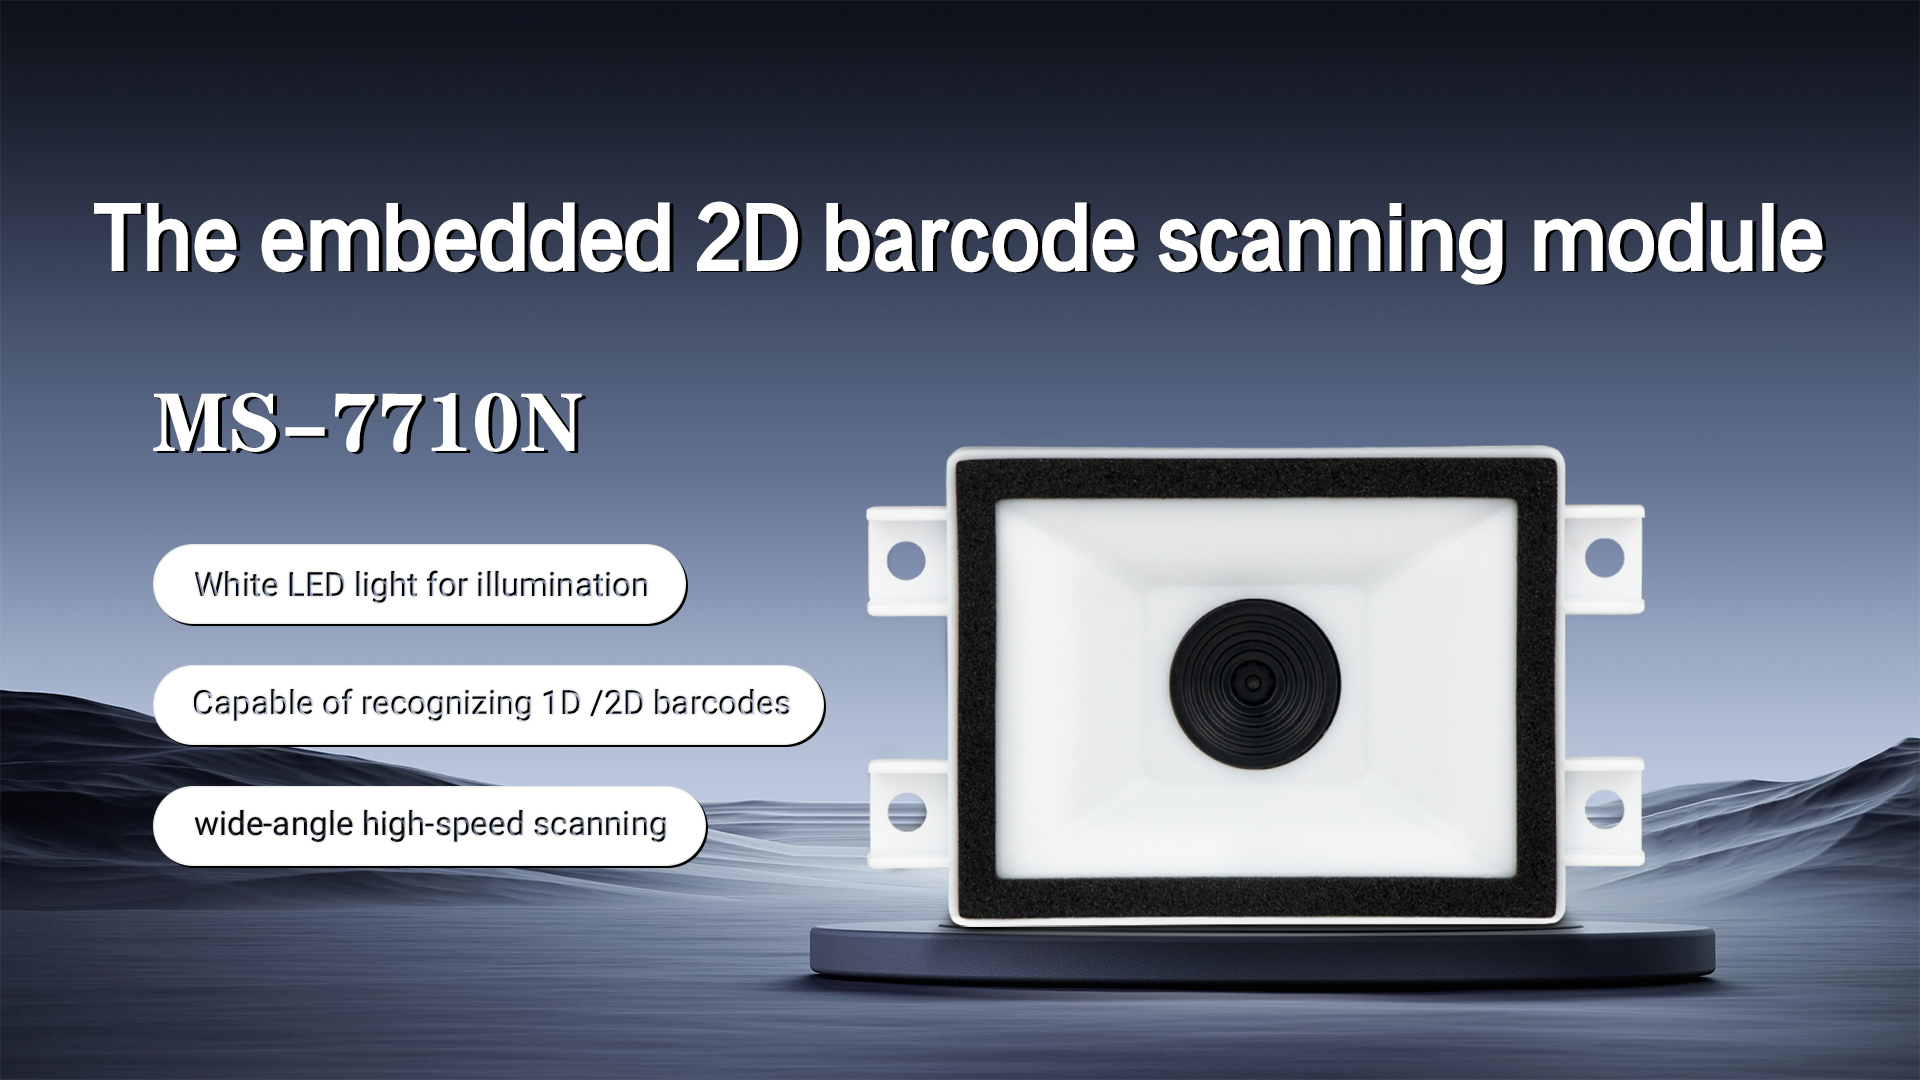 MASUNG 2D scanning module MS-7710N is used in store self-service checkout equipment